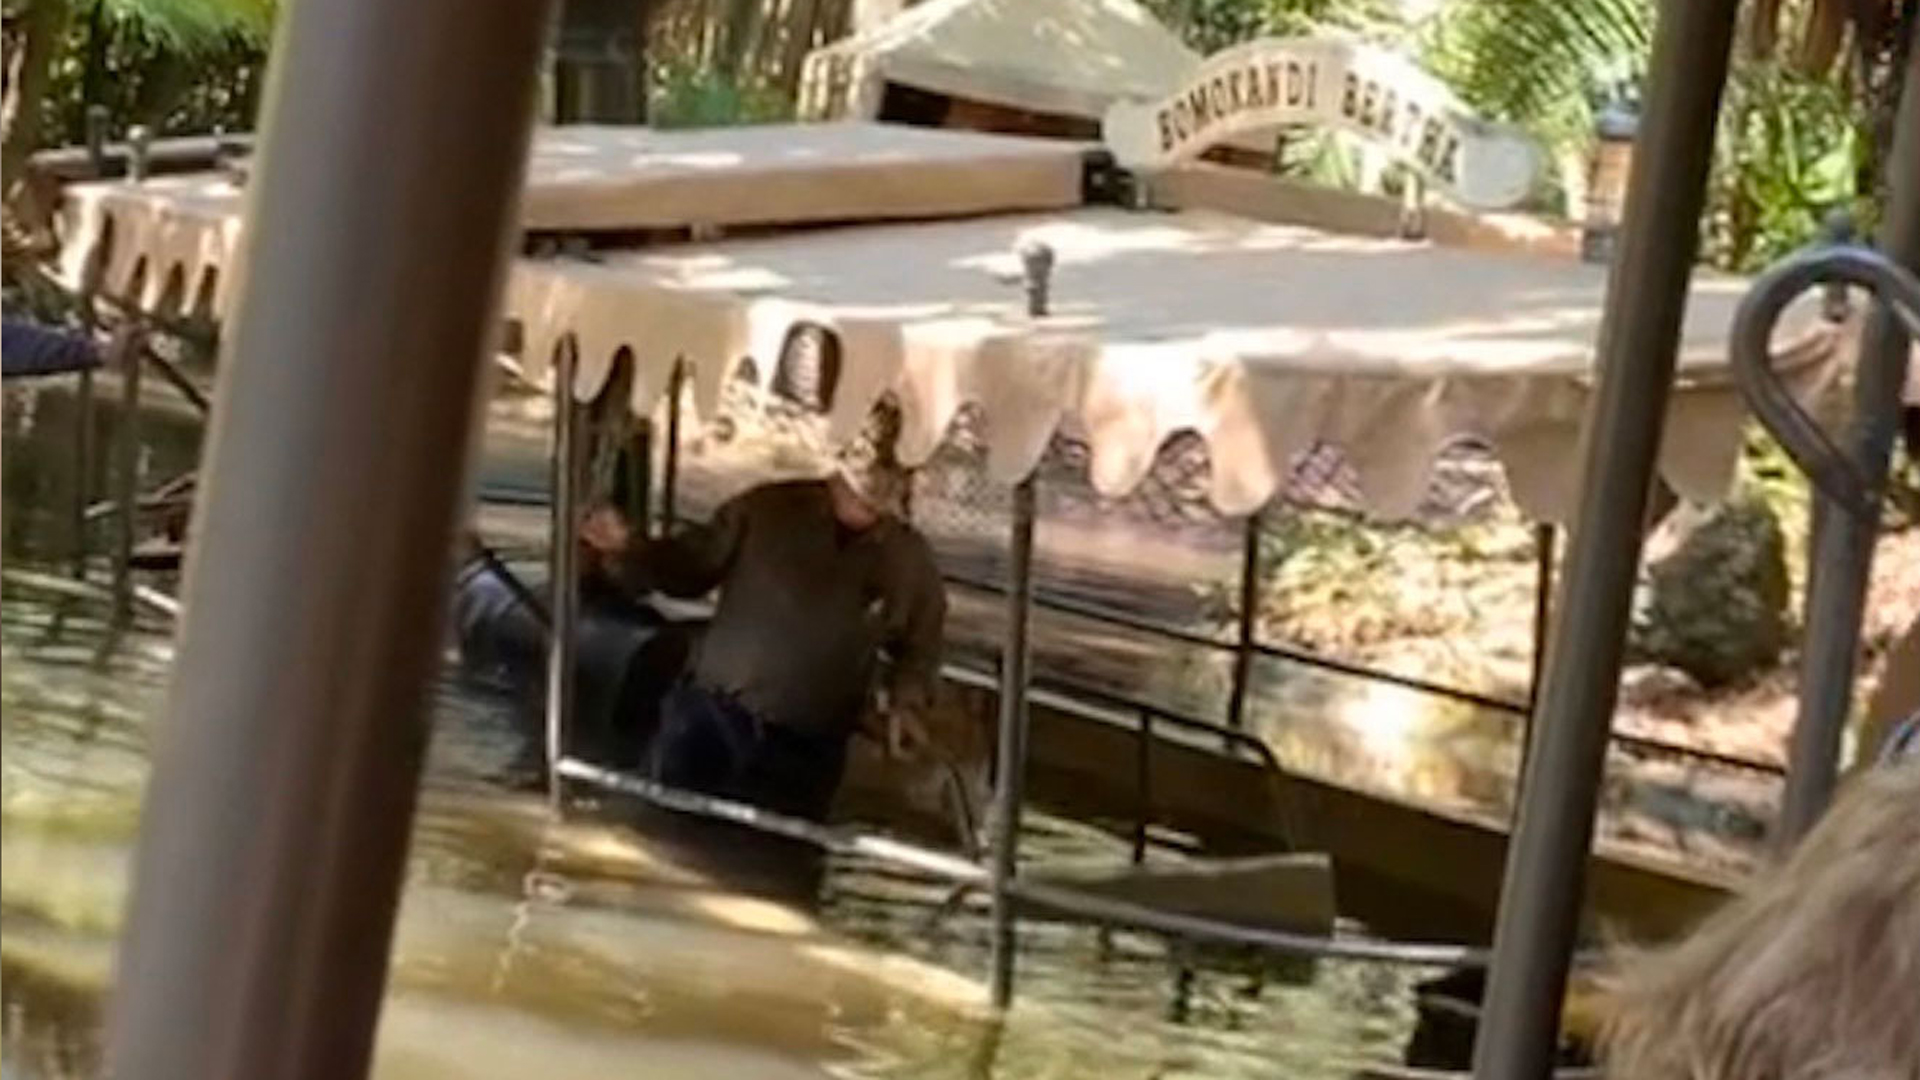 Disney World's Jungle Cruise ride briefly closes after boat takes on water with passengers aboard